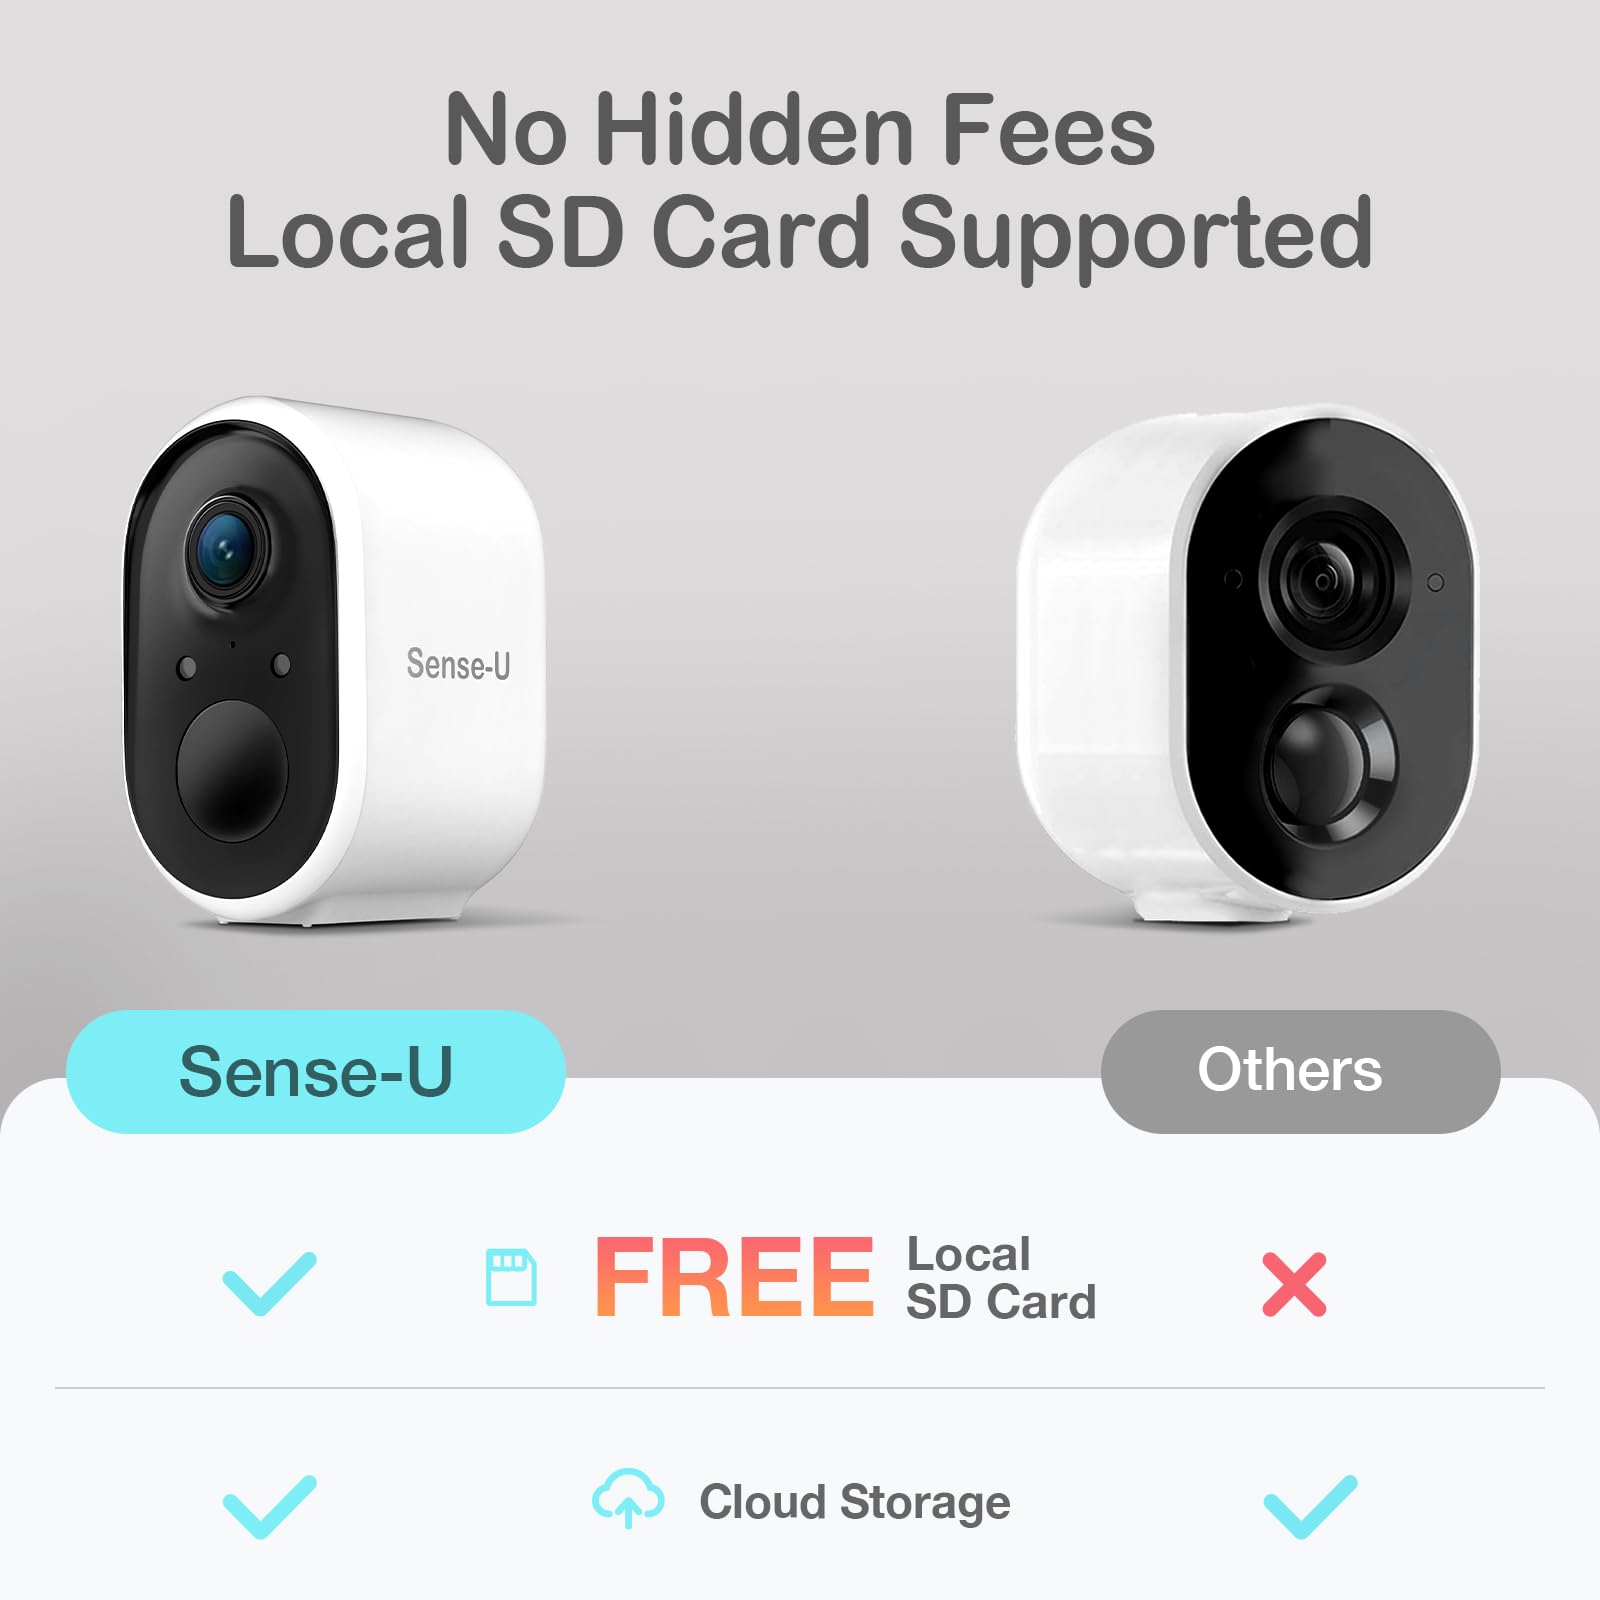 Sense-U Security Wireless Outdoor Camera 2, FSA&HSA Eligible, HD Video/No Monthly Fee/Rechargeable/Night Vision/PIR Motion Detection/Siren Alarm/Activity Zone/Waterproof